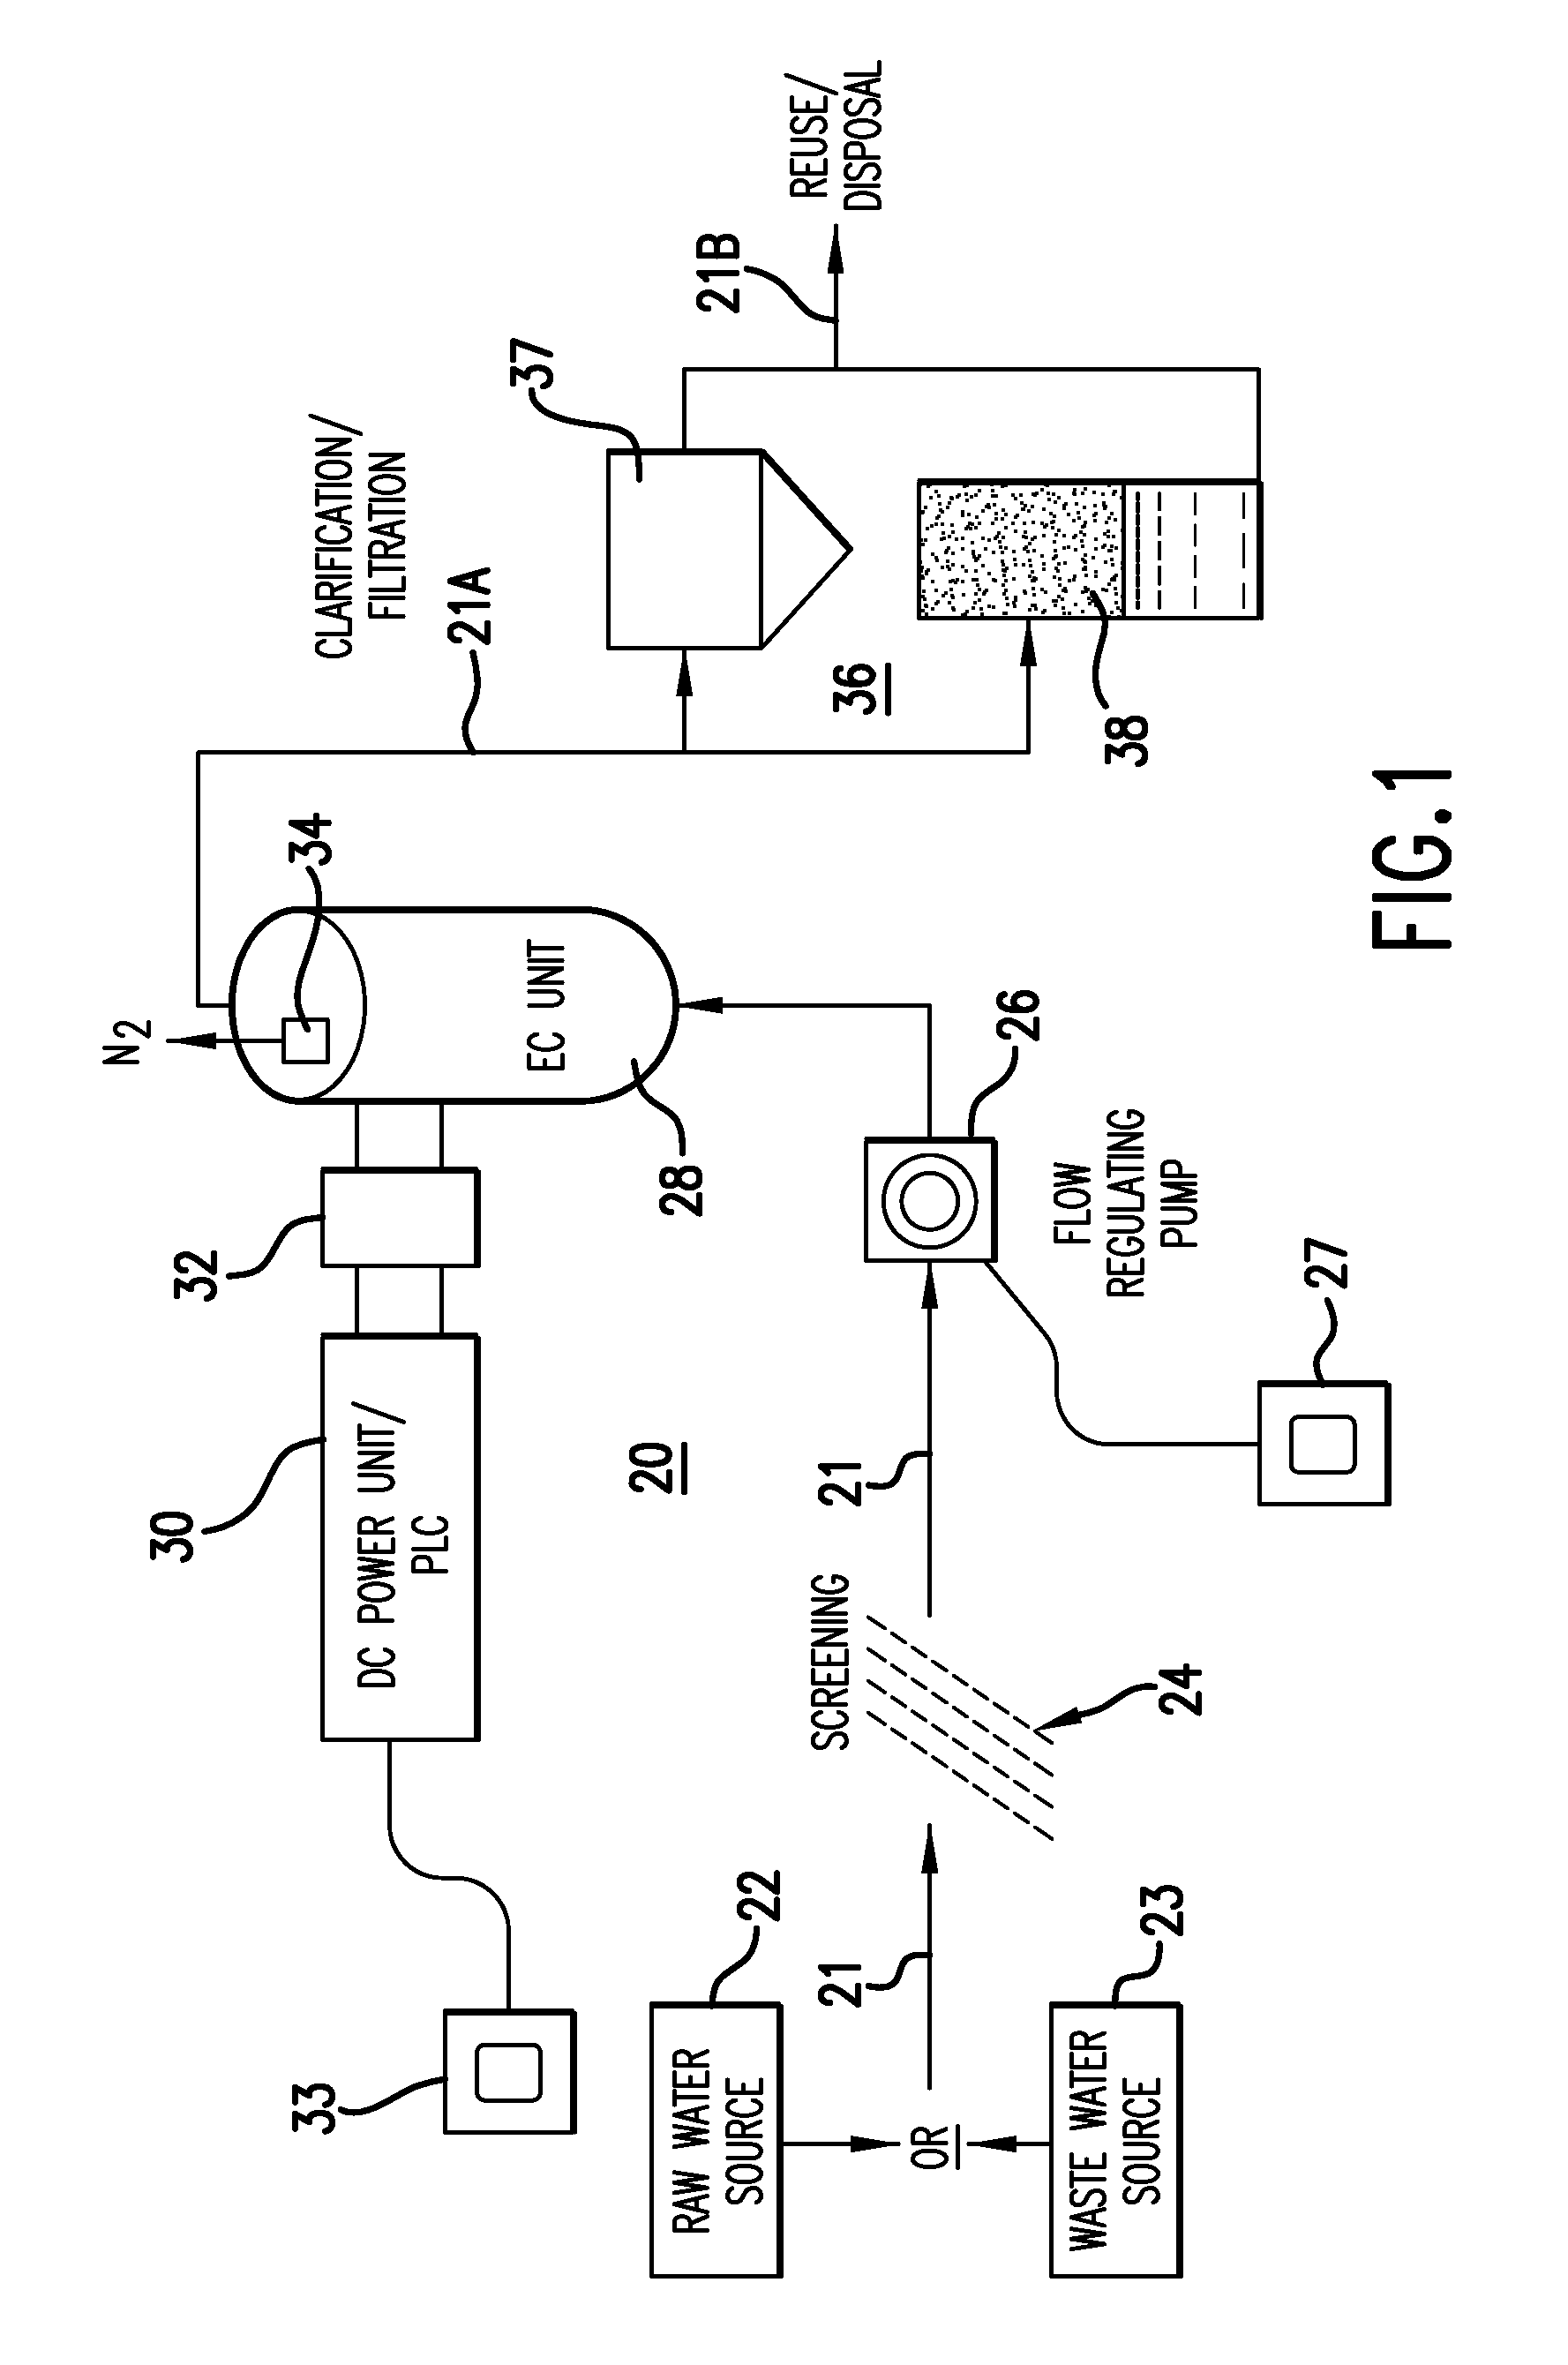 Electrochemical system and method for the treatment of water and wastewater